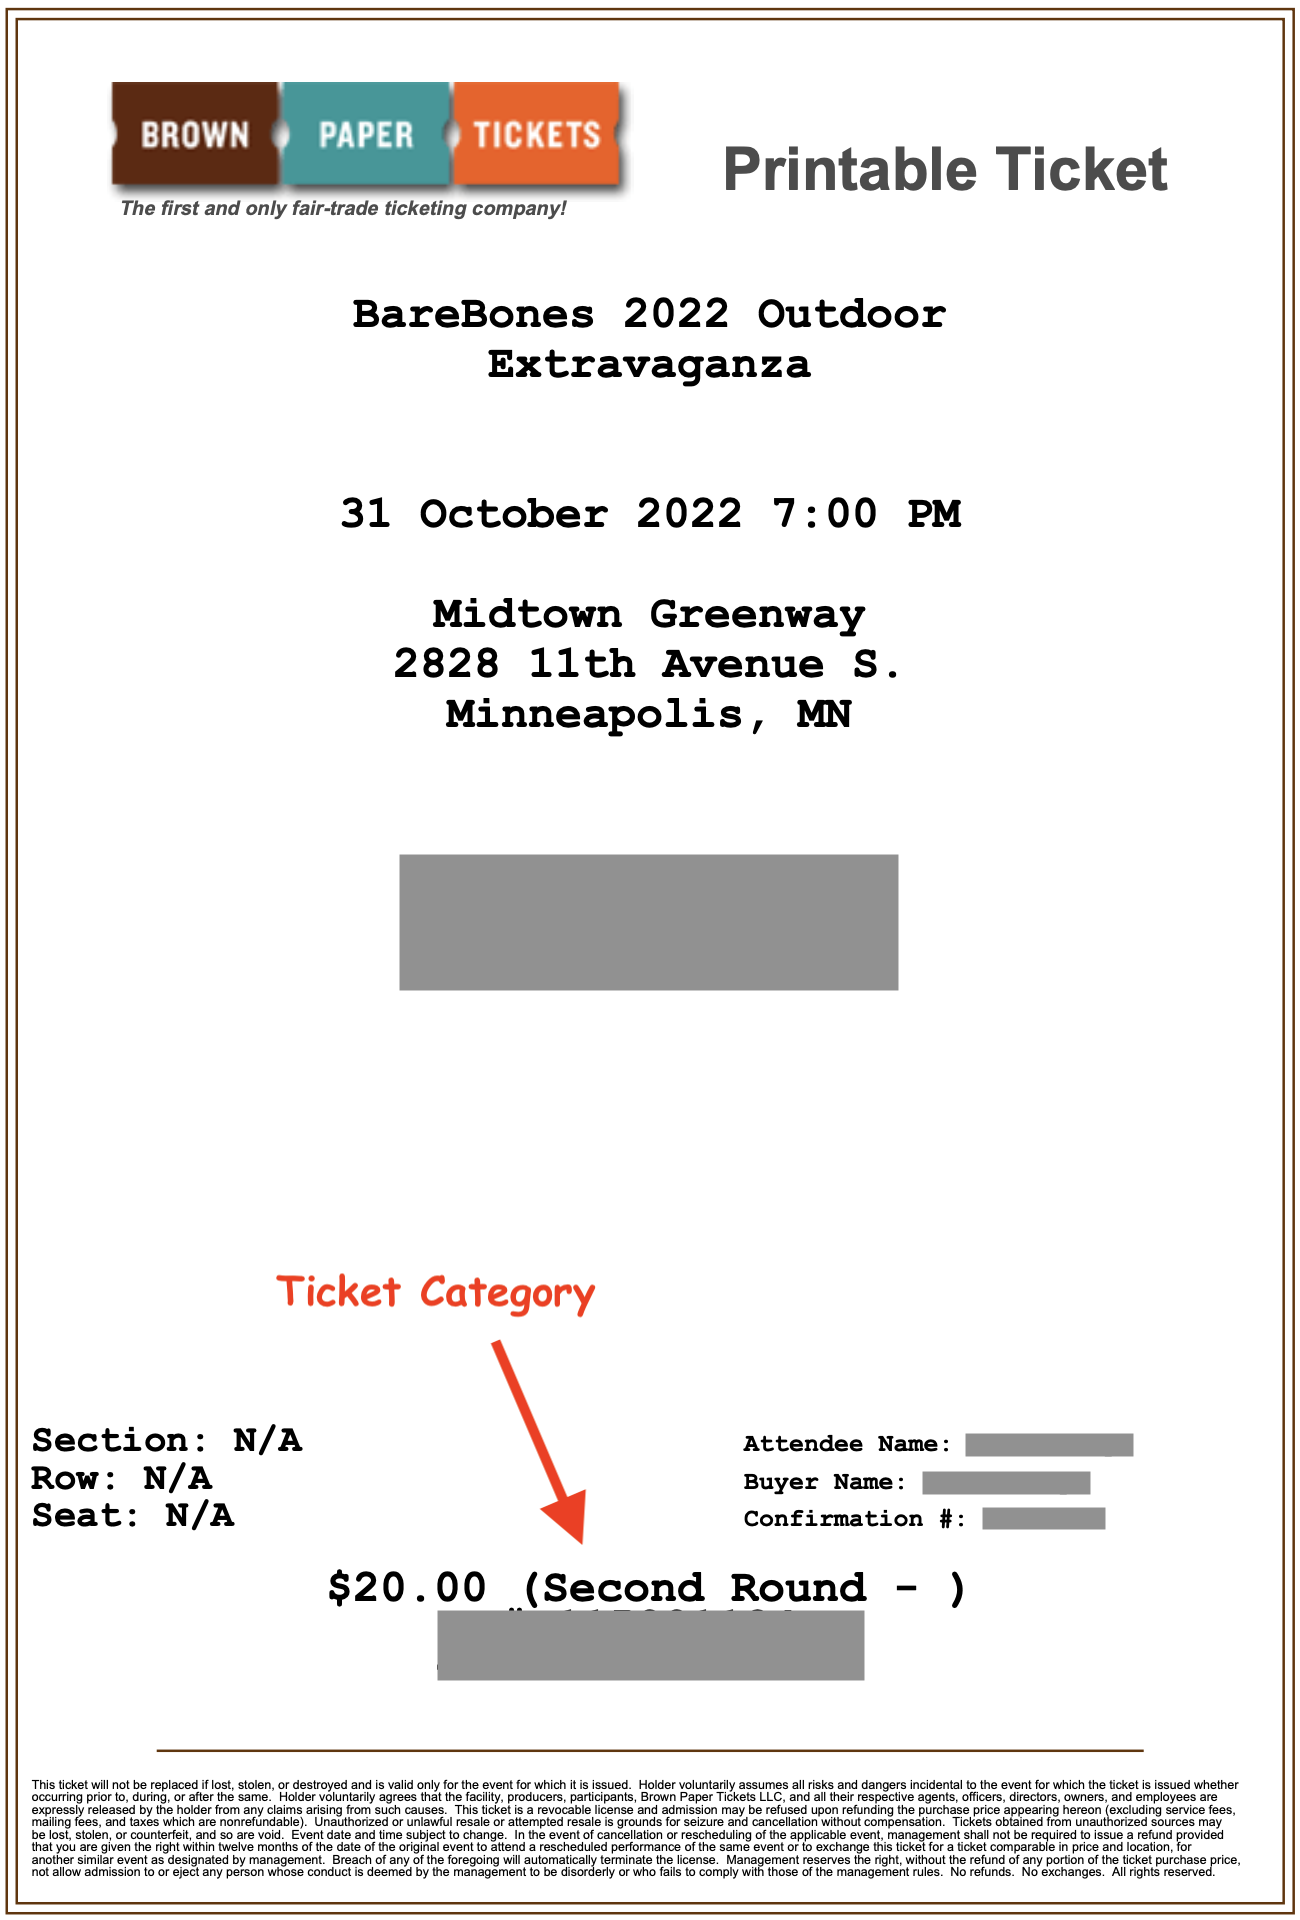 Brown Paper Ticket Print at Home example